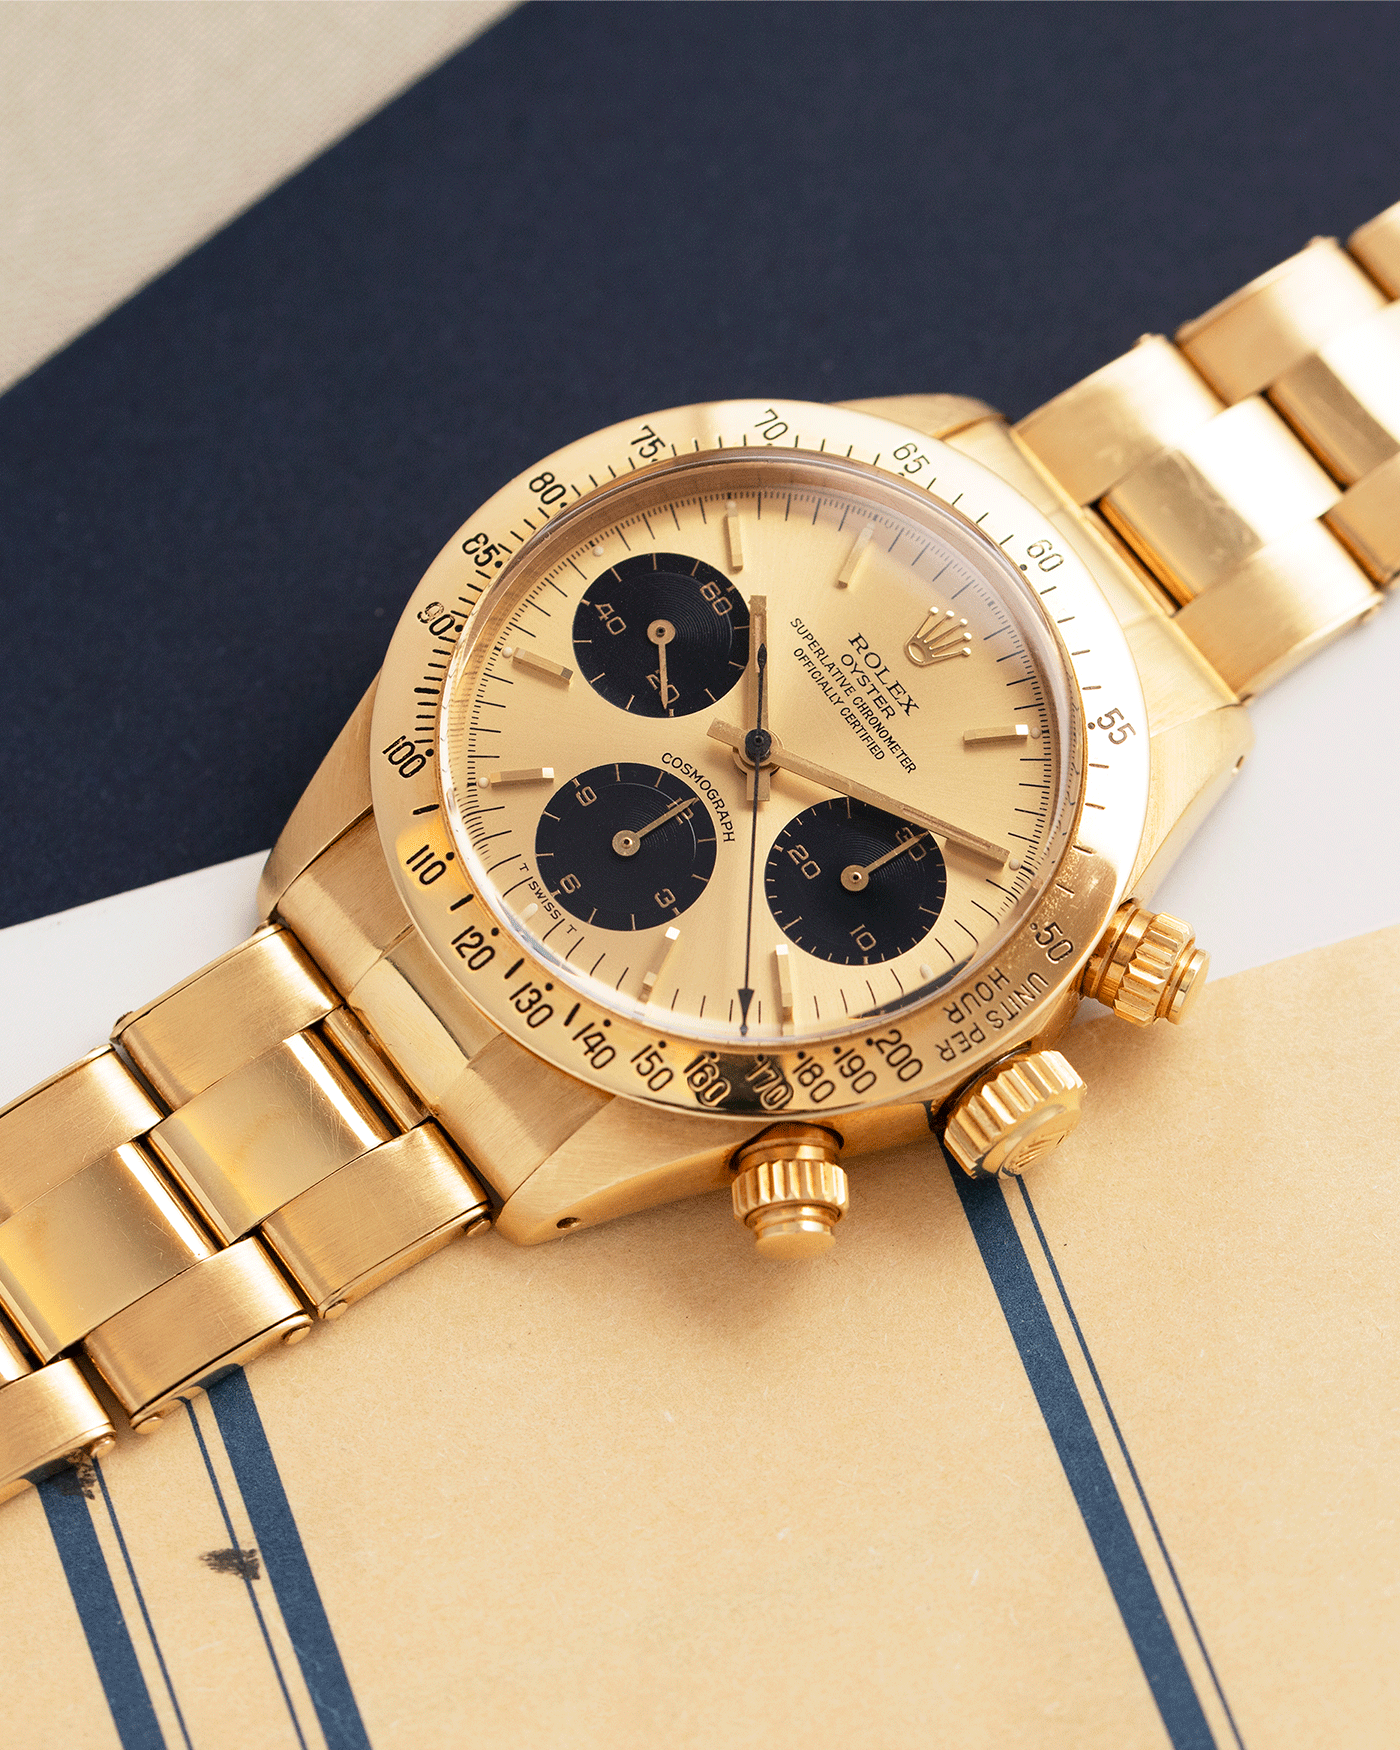 Rolex Cosmograph Daytona 6265 Vintage Yellow Gold Chronograph Watch | S.Song Vintage Timepieces 